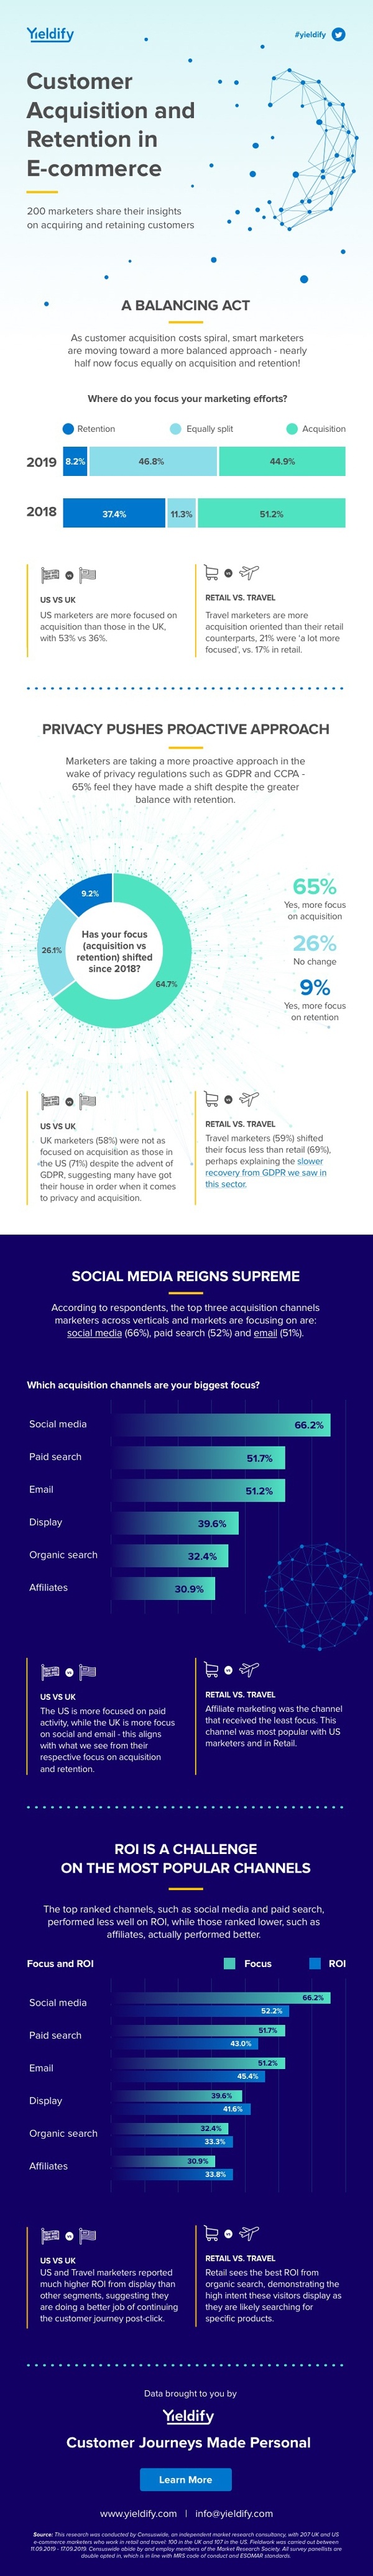 Infographic: research on customer acquisition vs retention